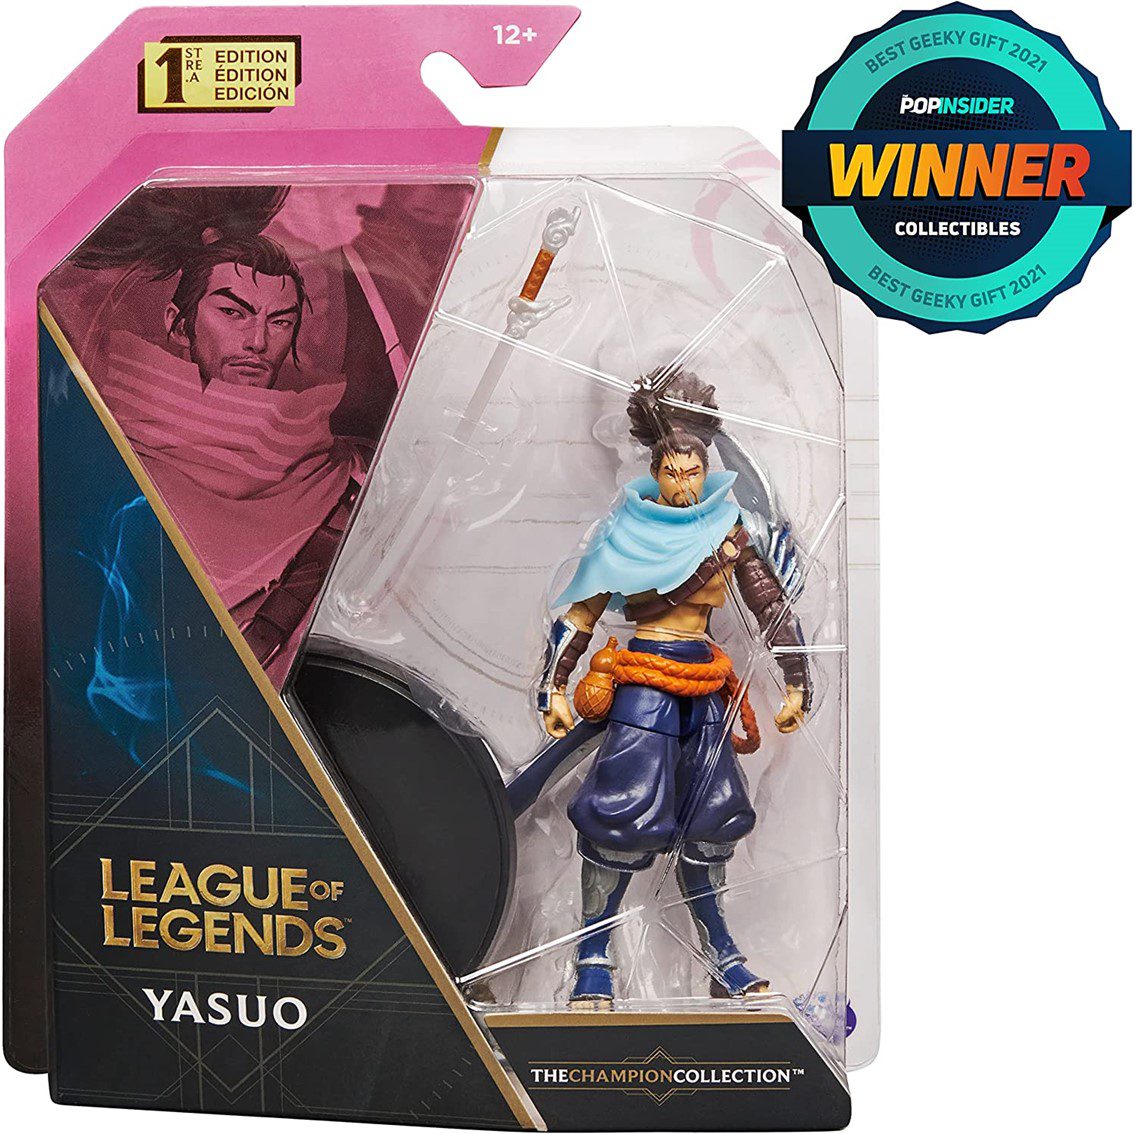 778988384992-PN-6062259-Cod.-Articulo-MGS0000014504-Figura-league-of-legends-the-champion-collection-yasuo-1